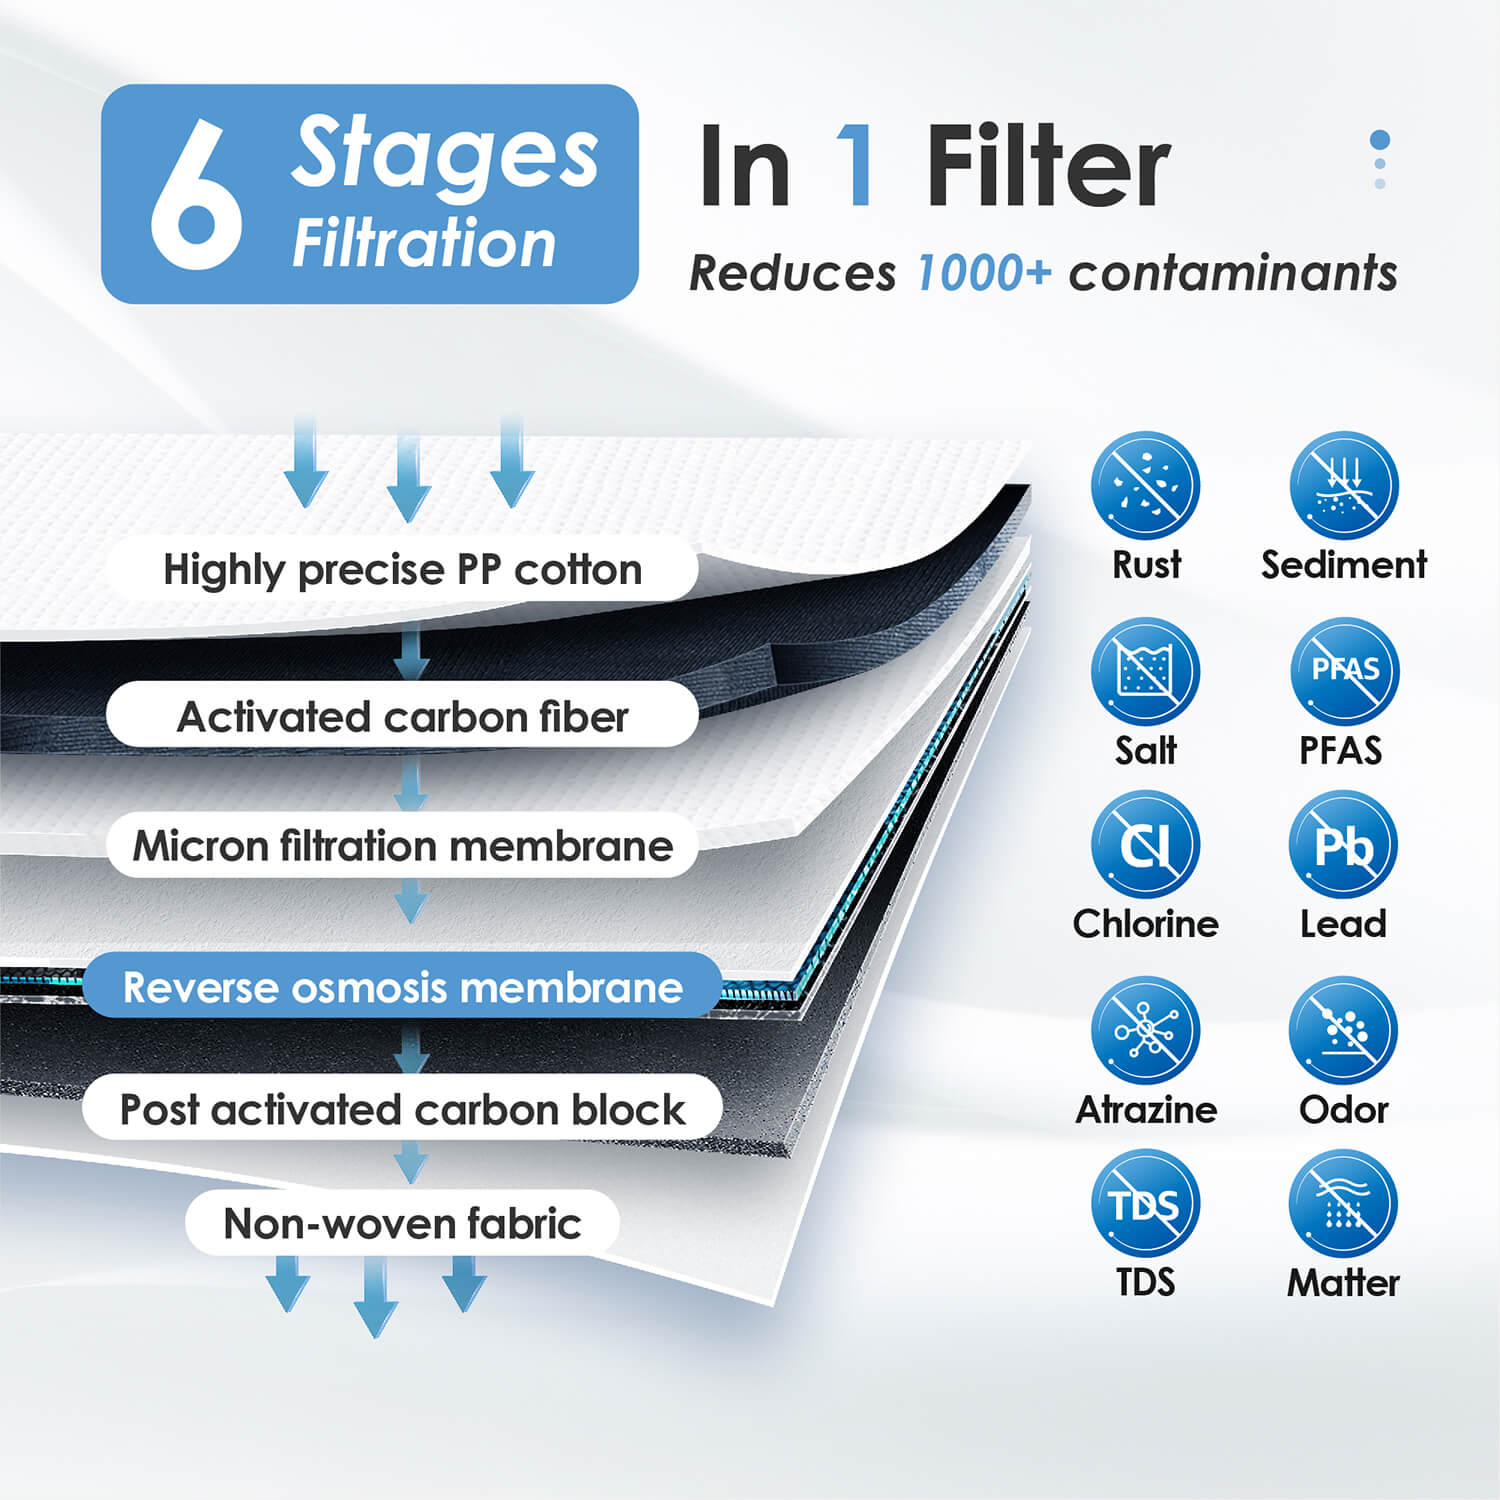 Upgraded 6 Stages Filtration